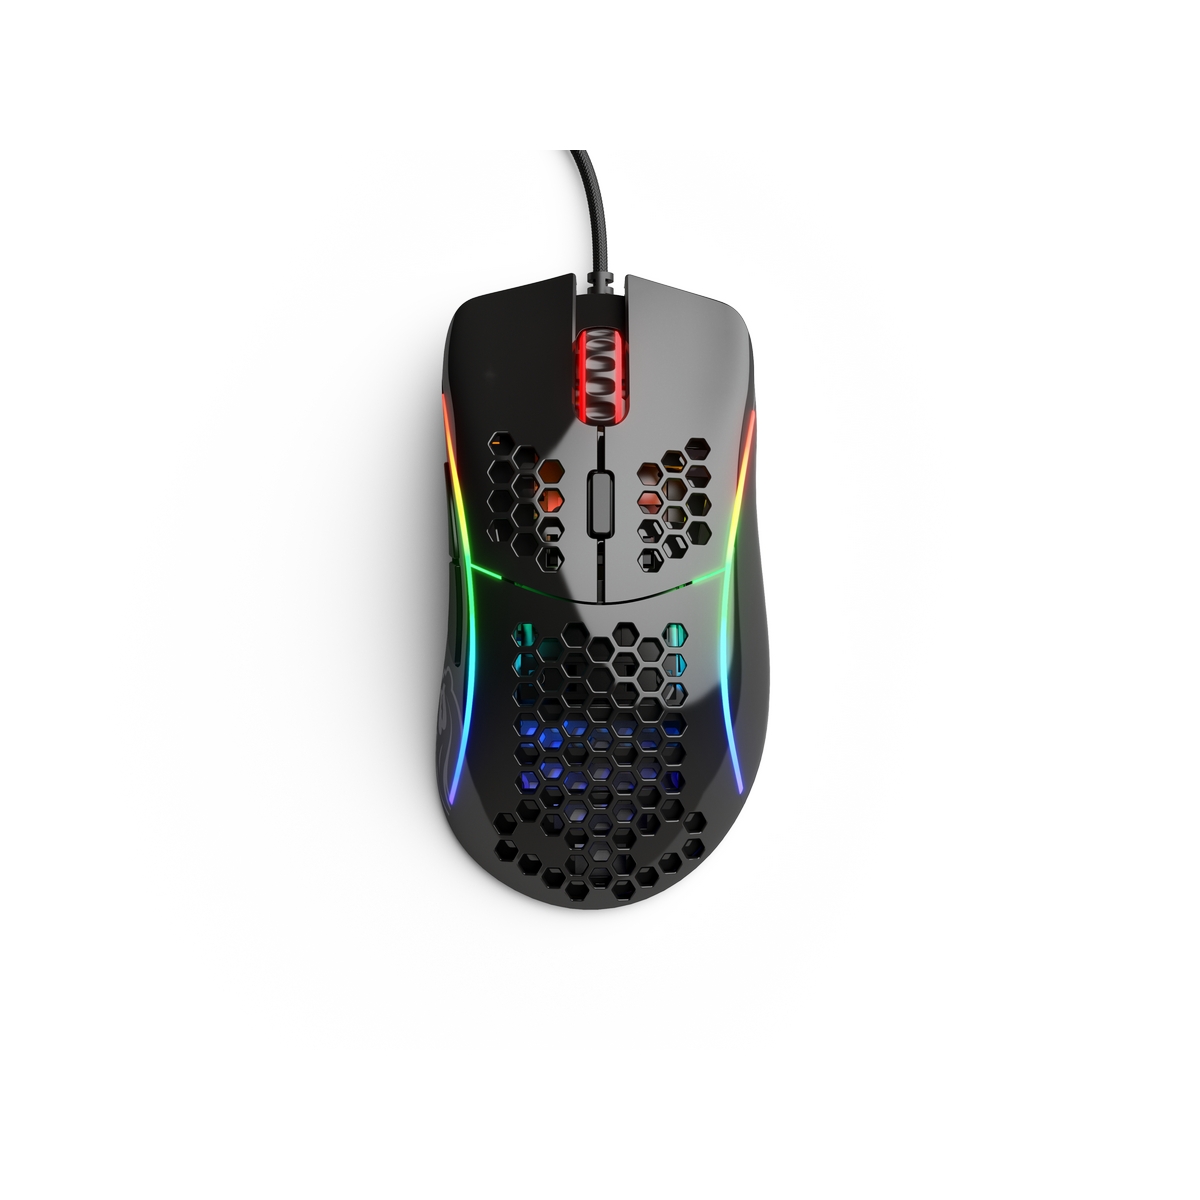 Glorious Model D USB RGB Optical Gaming Mouse - Glossy Black (GD-GBLACK)